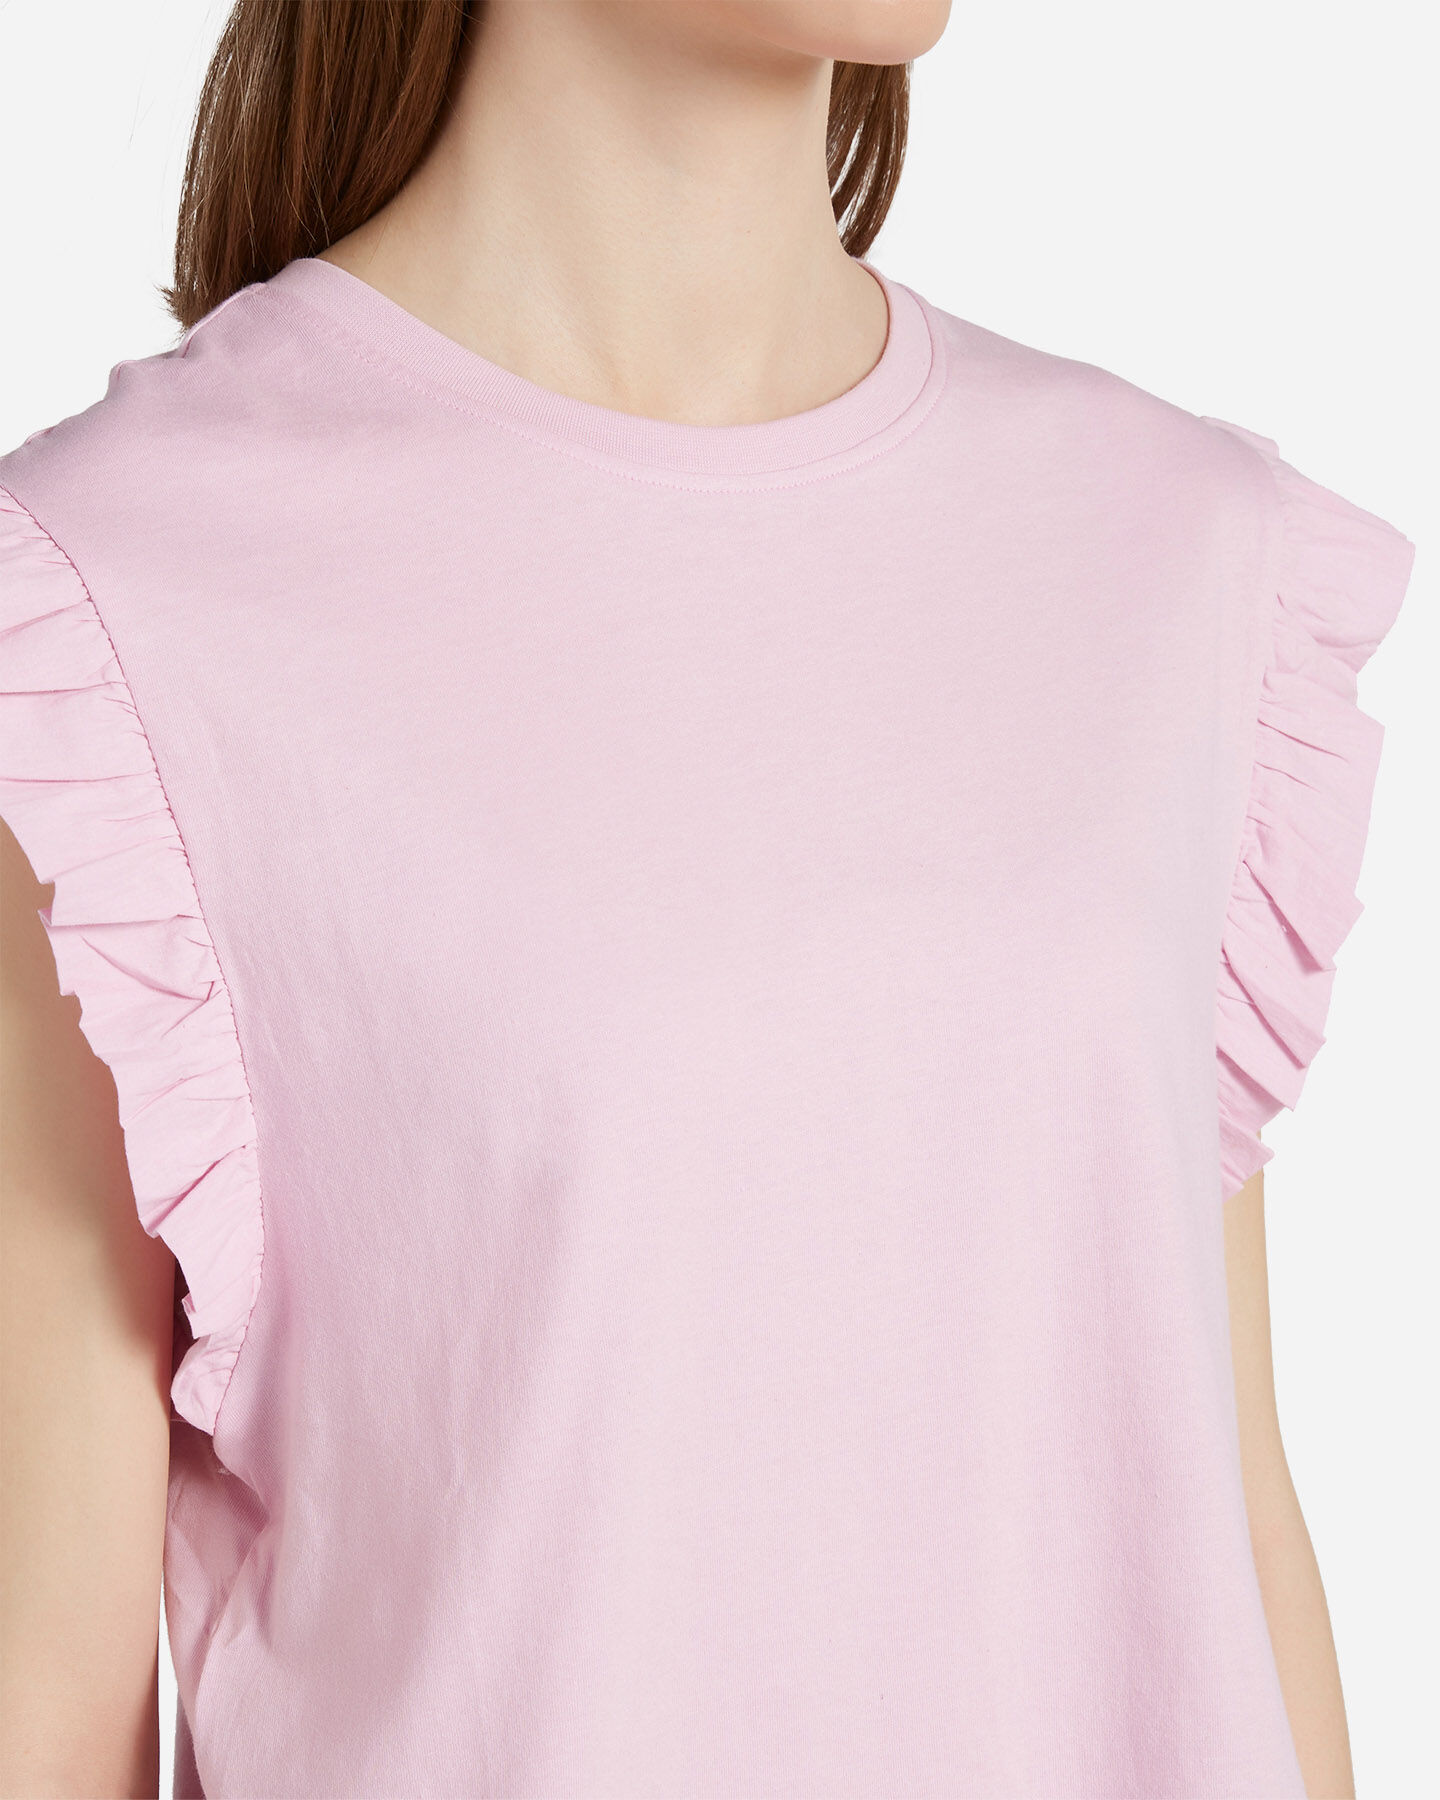  T-Shirt MISTRAL BASIC W S4100682|388|XS scatto 4